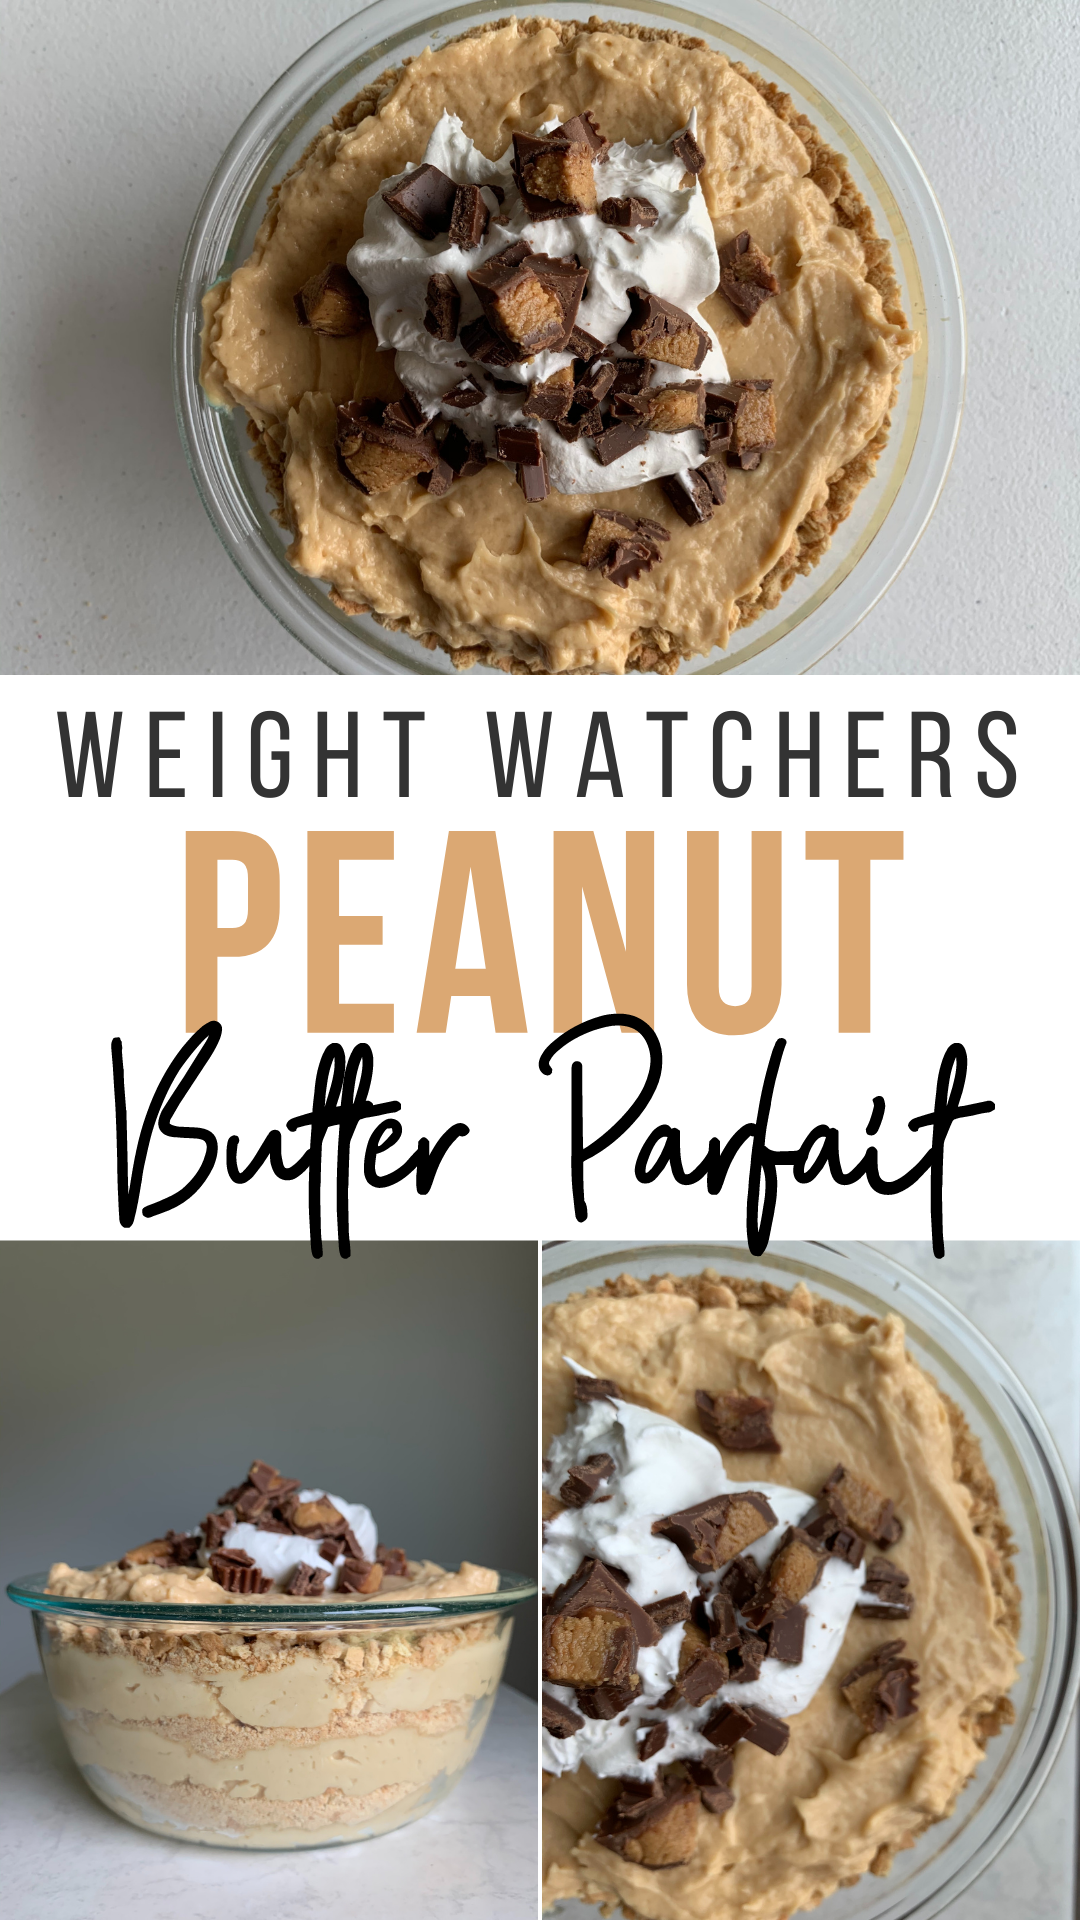 Pin showing the finished weight watchers peanut butter parfait ready to serve with title in the middle.